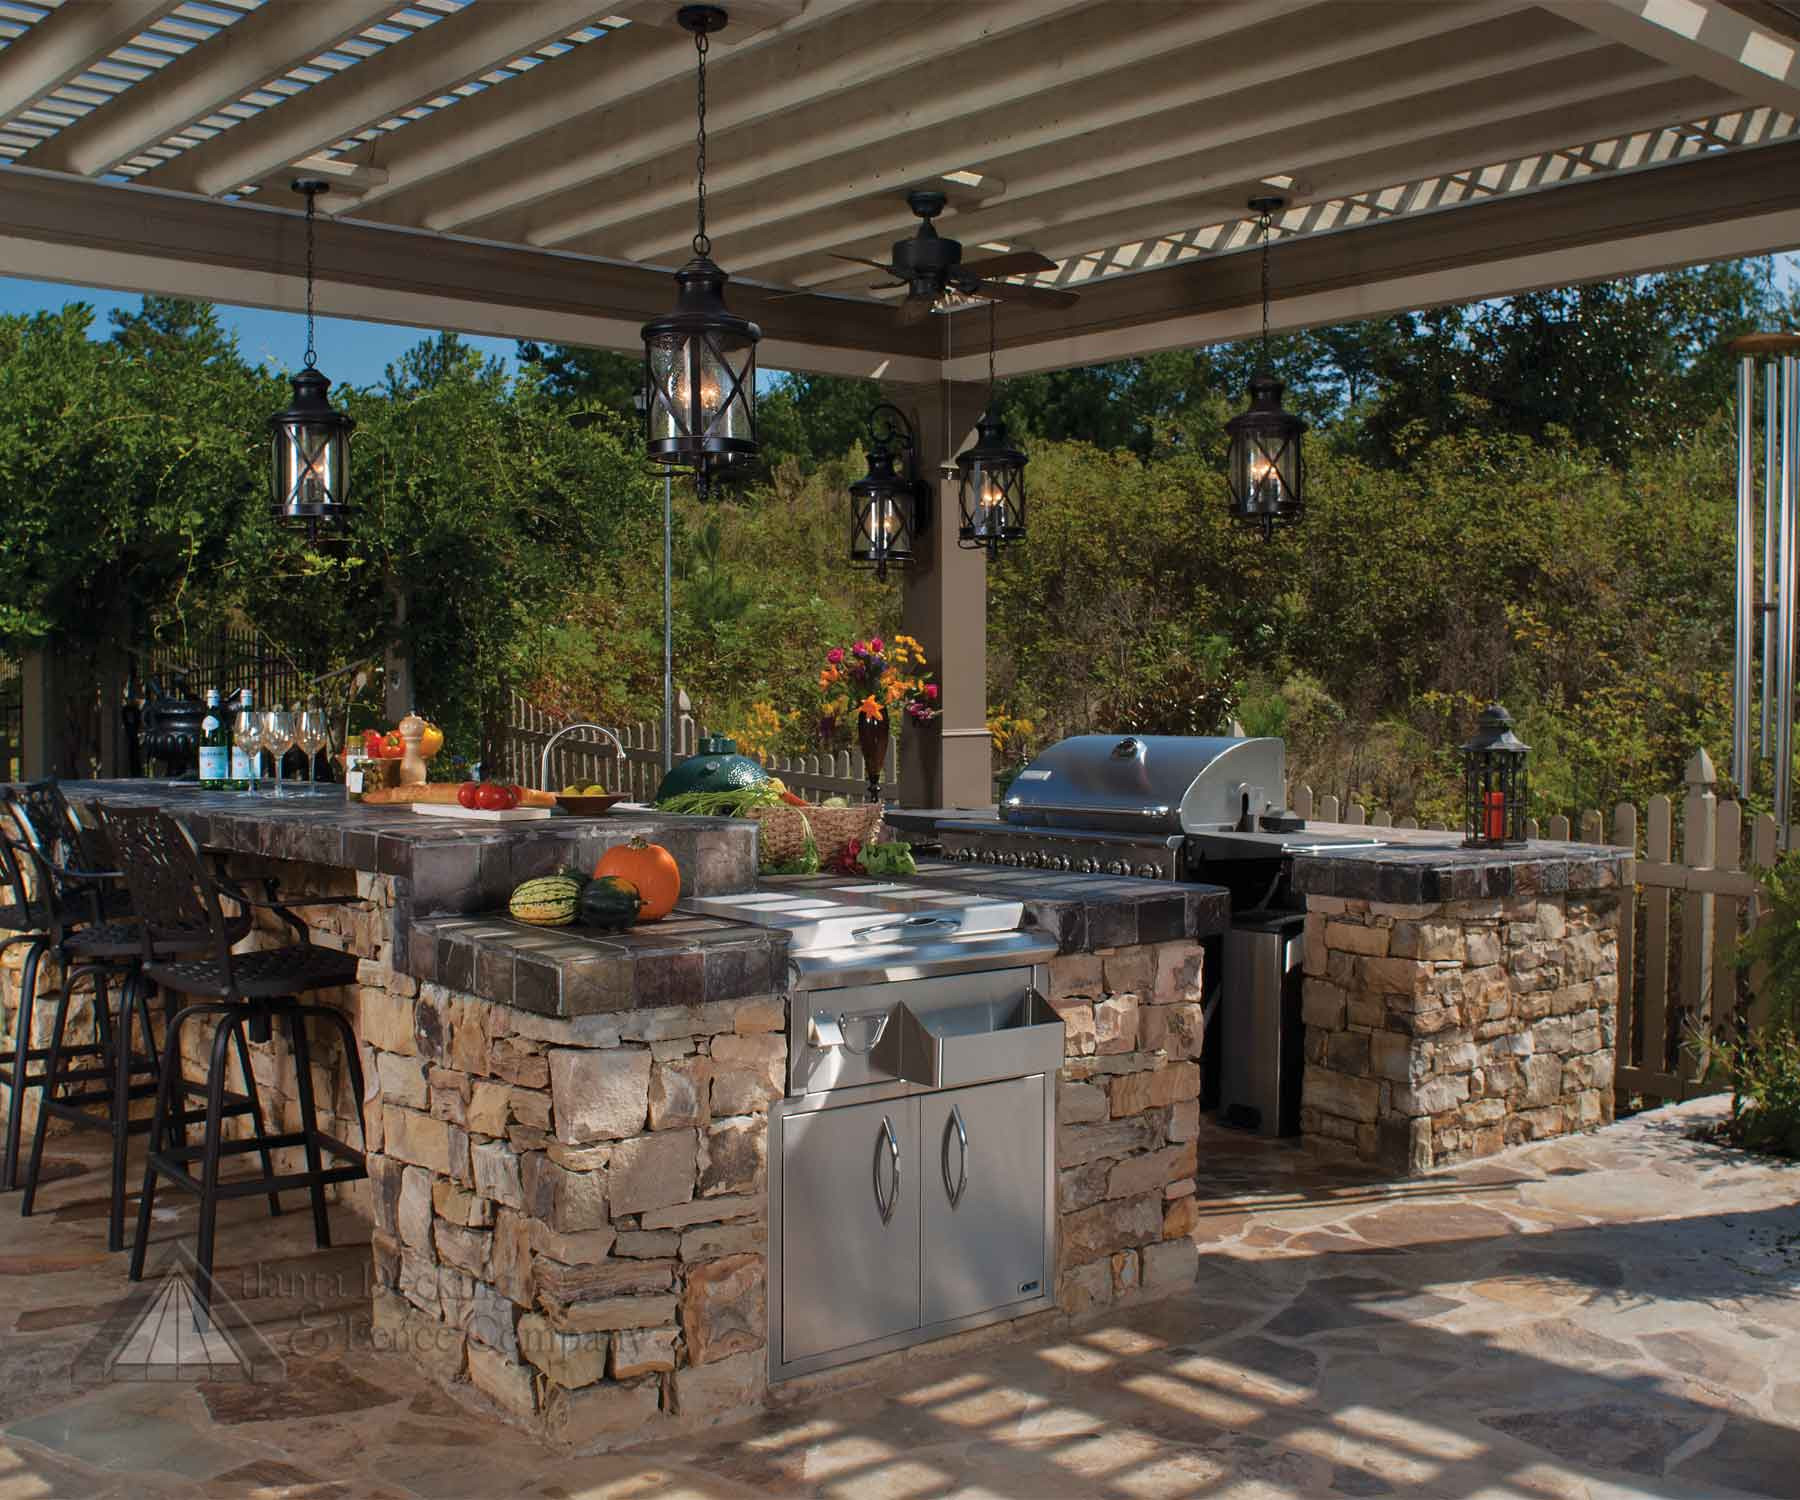 Outdoor Kitchen Designs
 Outdoor Kitchen Designing The Perfect Backyard Cooking